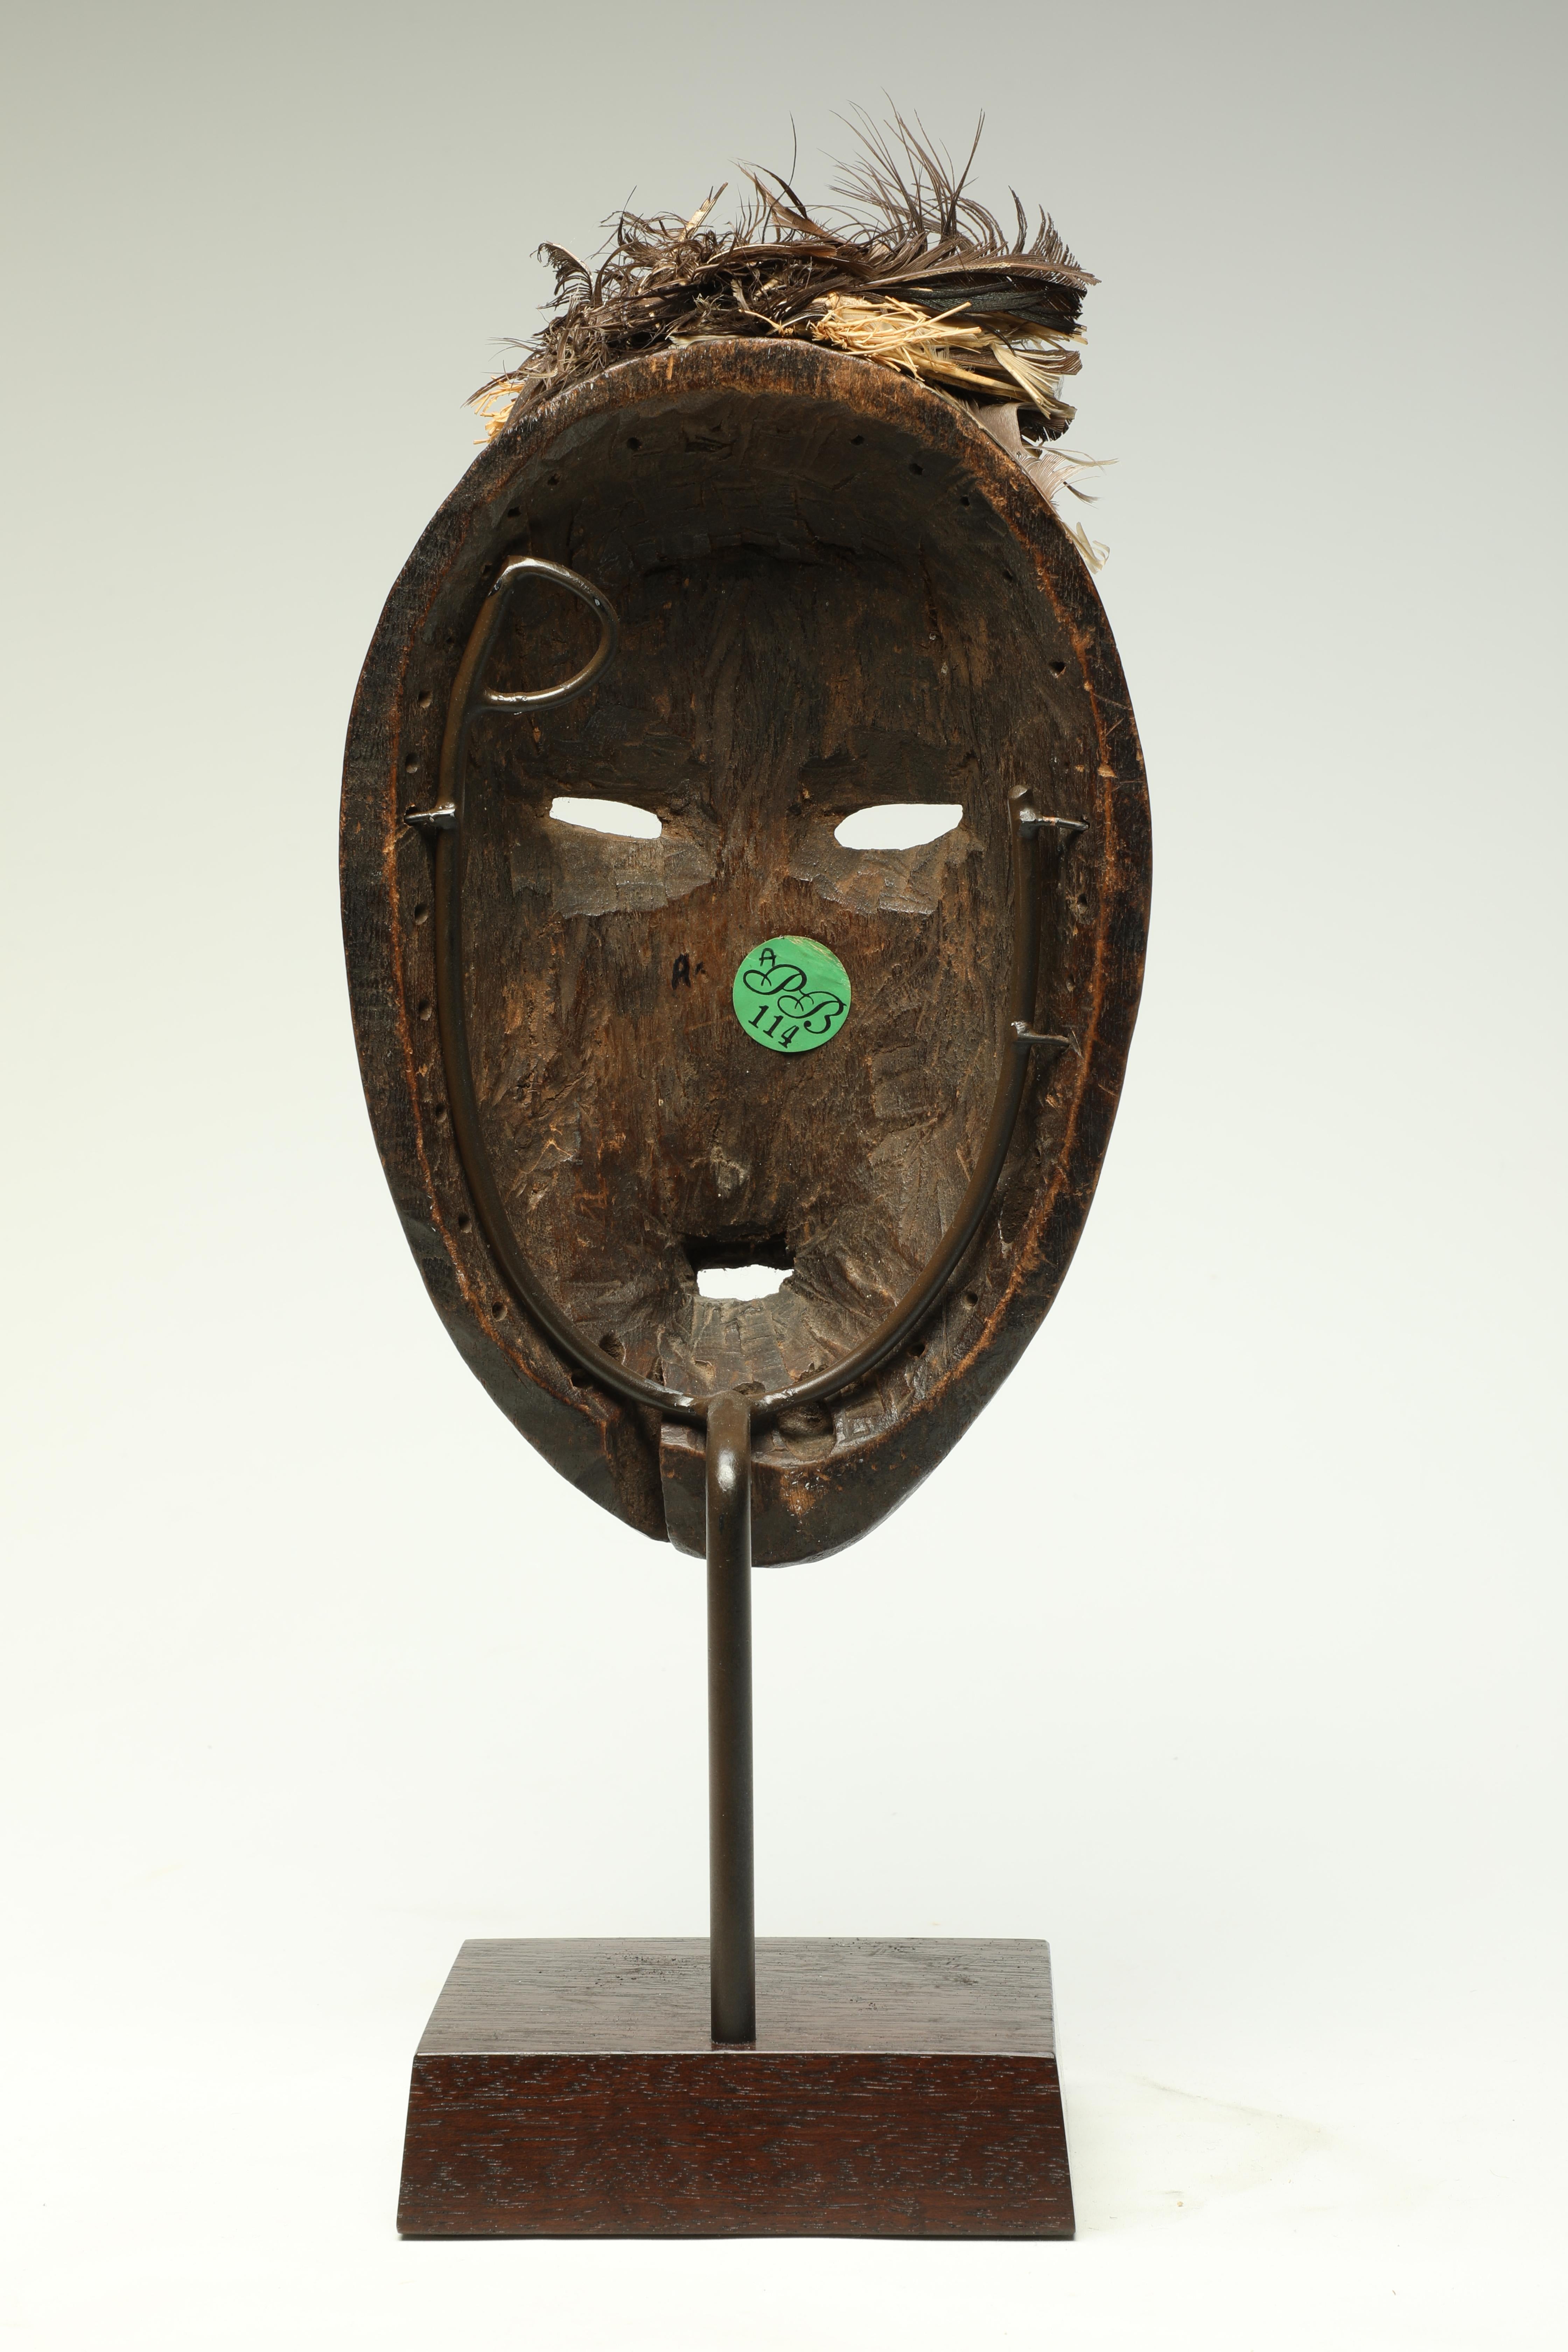 Wood Expressive Early Classic Cubist Dan Mask Early 20th Century Liberia, Africa For Sale